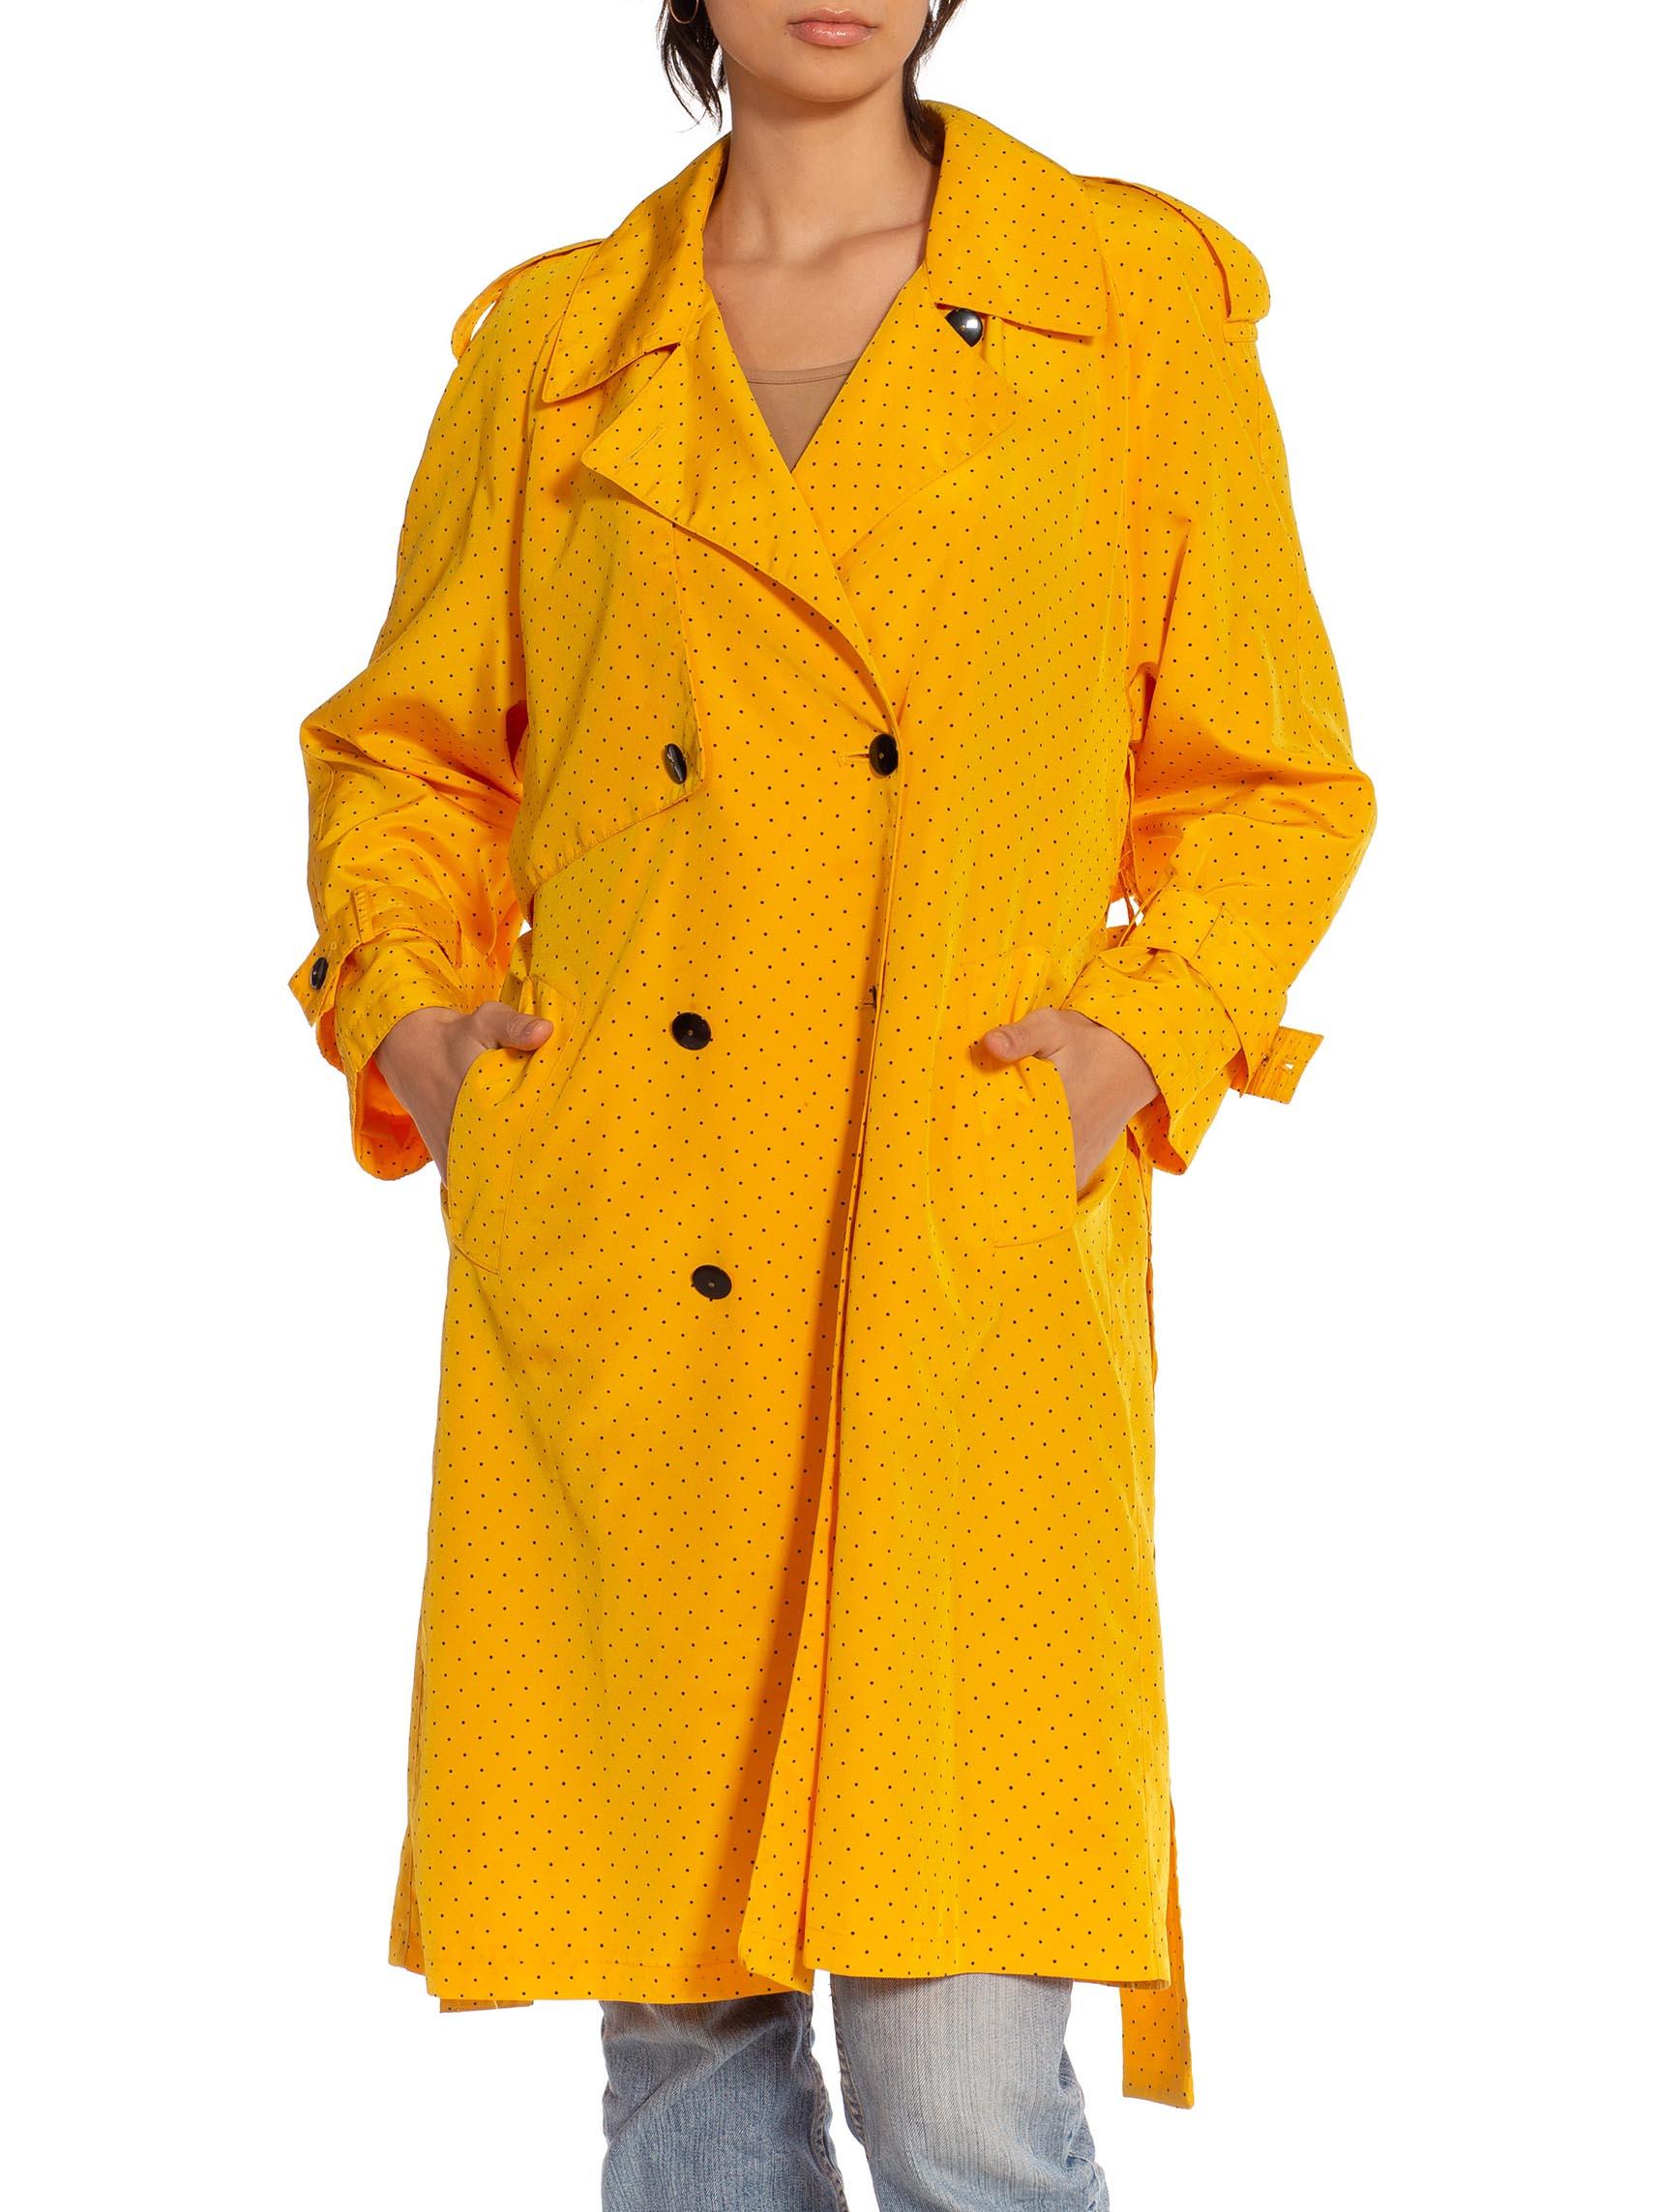 1980S Yellow & Black Polka Dot Double Breast Trench Coat With Pockets 1